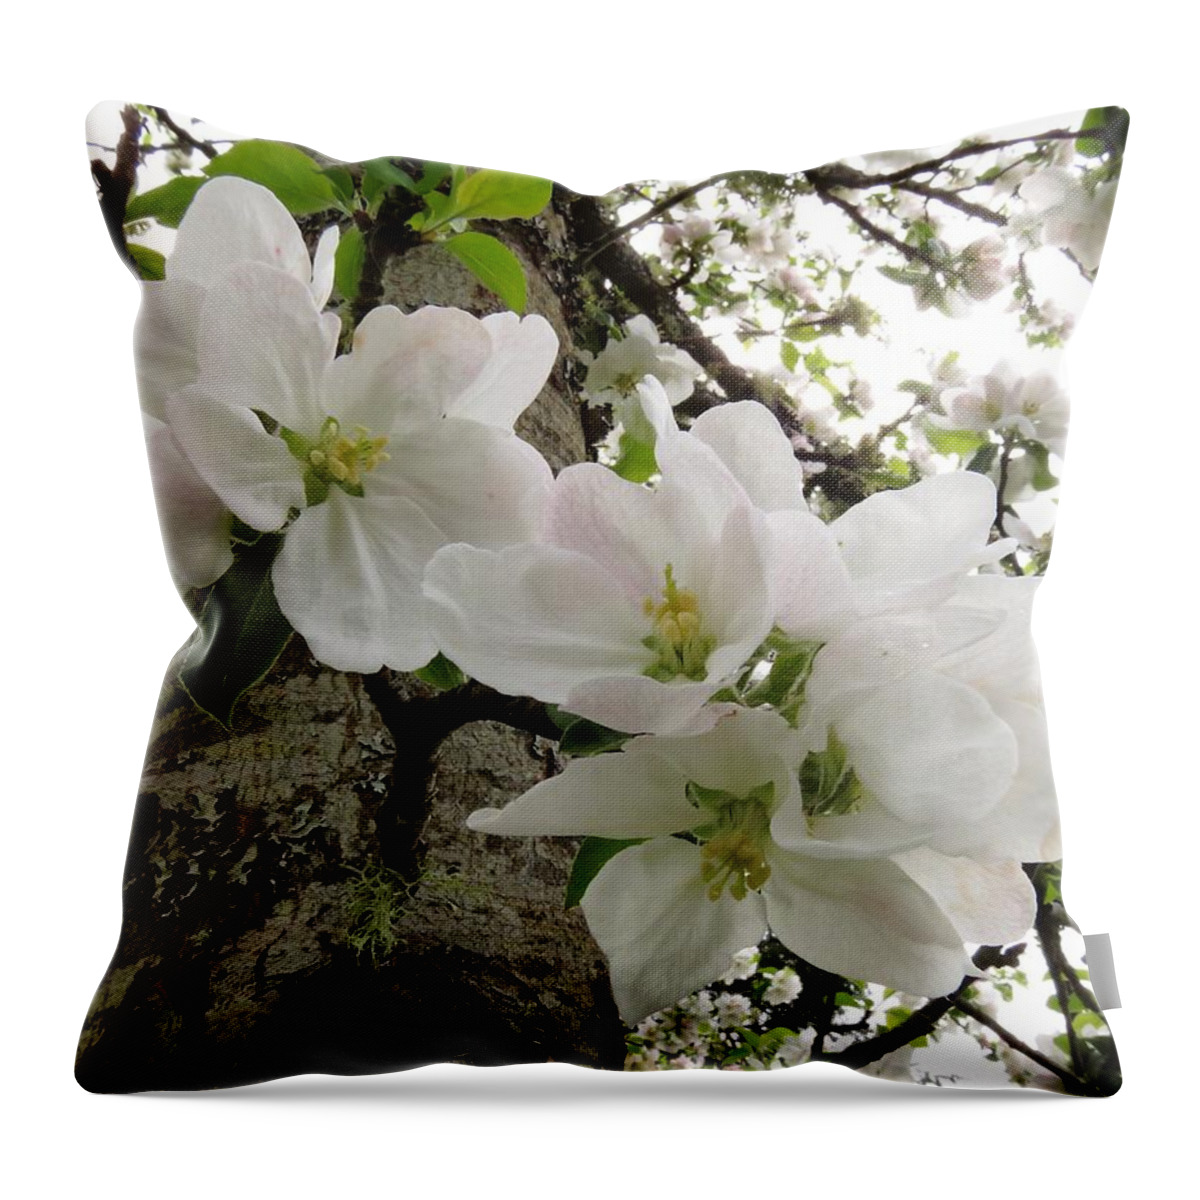 Apple Blossom Throw Pillow featuring the photograph Apple Blossom Time by I'ina Van Lawick